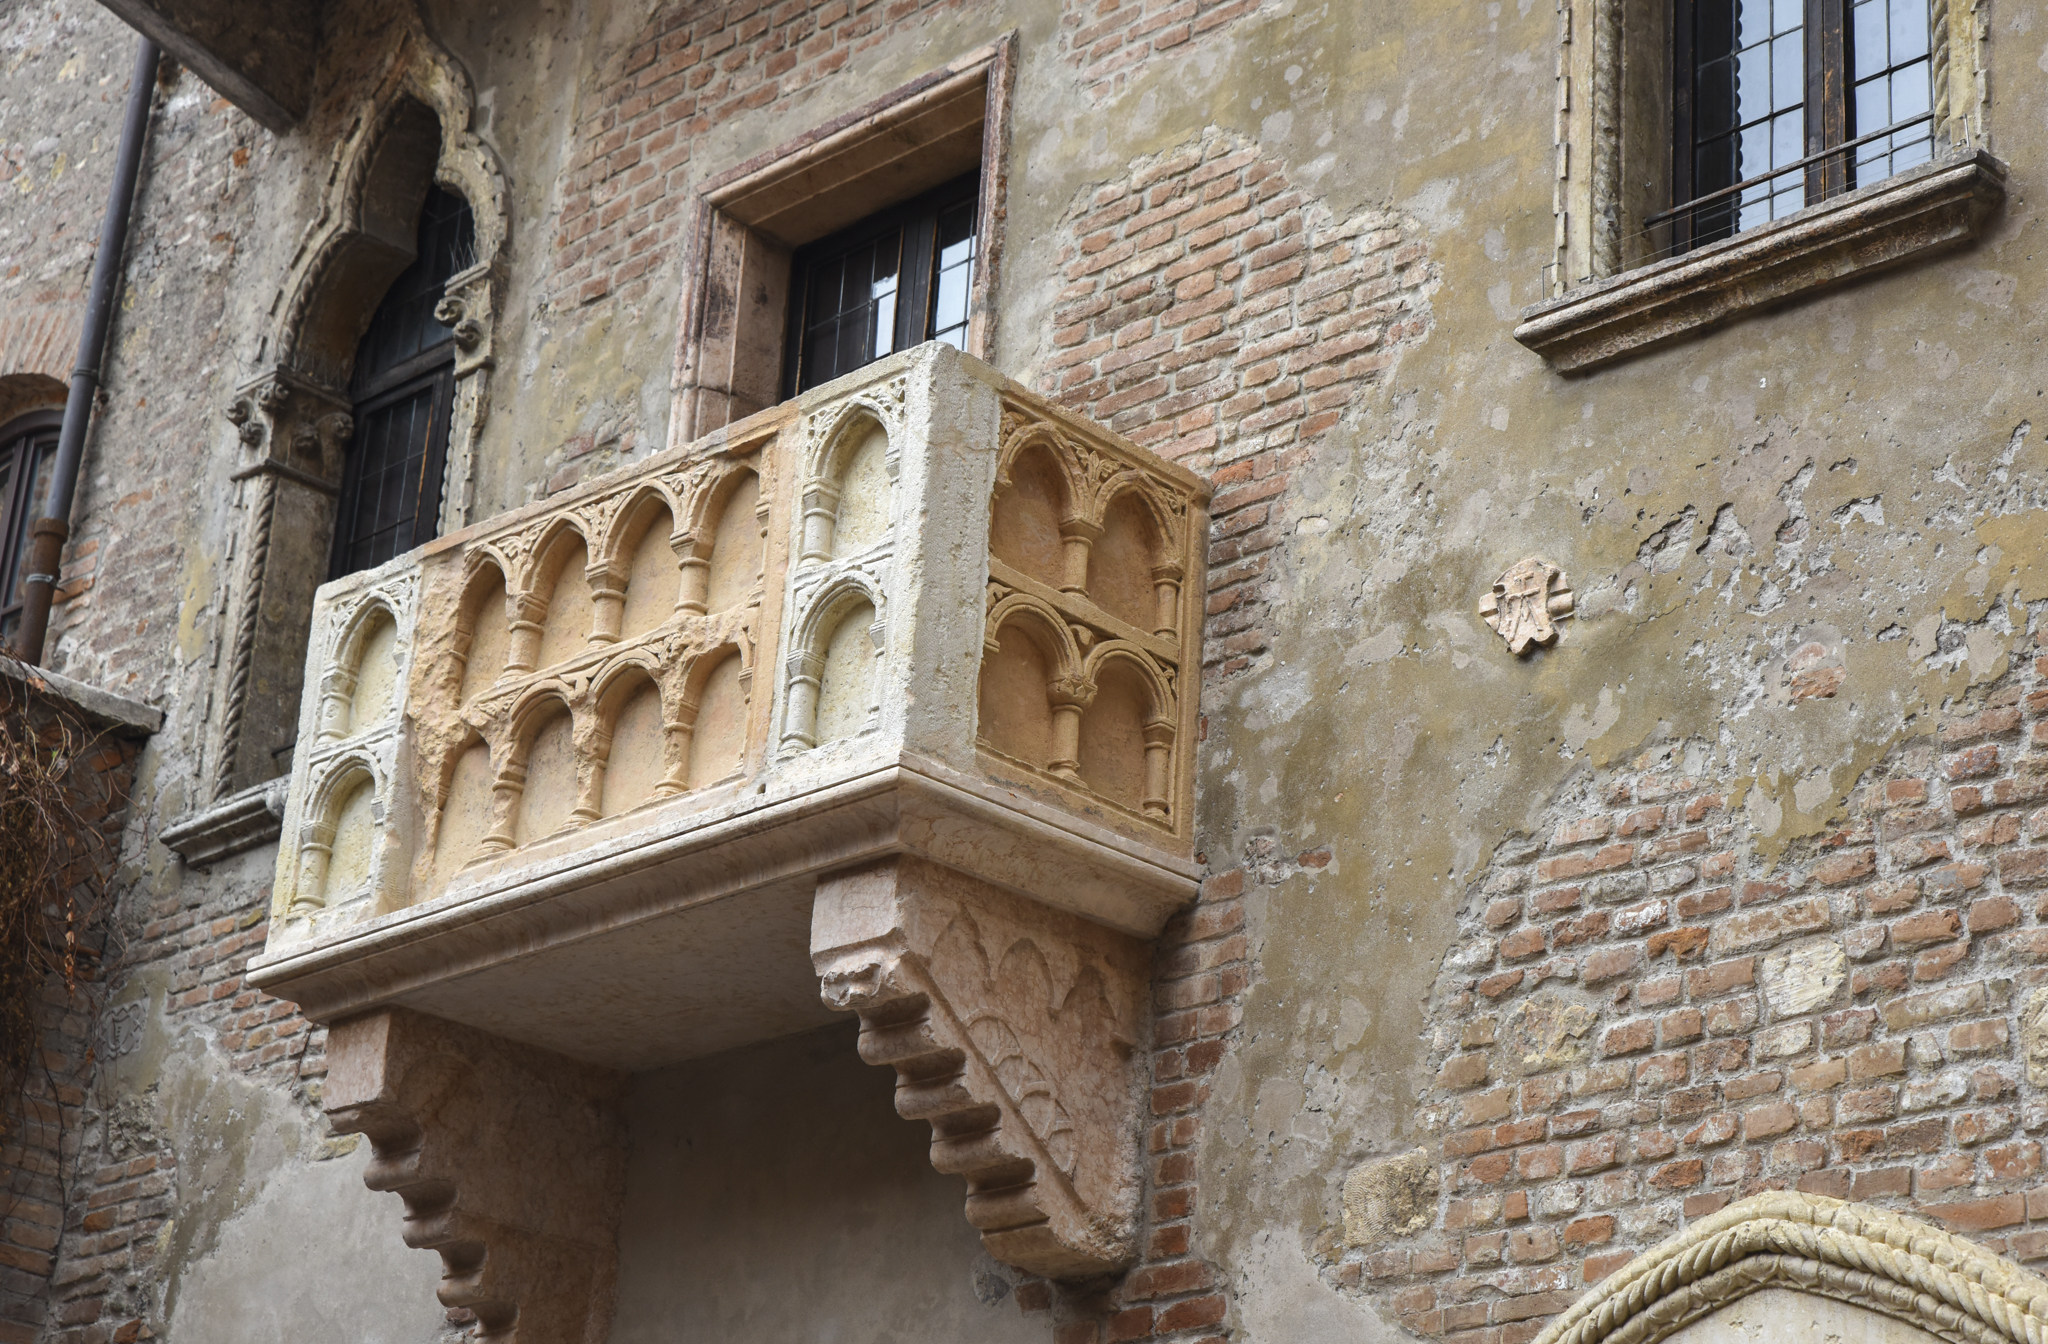 The balcony in Verona, Italy, where Juliet was supposedly serenaded by Romeo. Shakespeare’s tale draws large numbers of visitors to the city, but the Bard copied the story from another author who lived in a nearby city, Vicenza. Photo: Ronan O’Connell